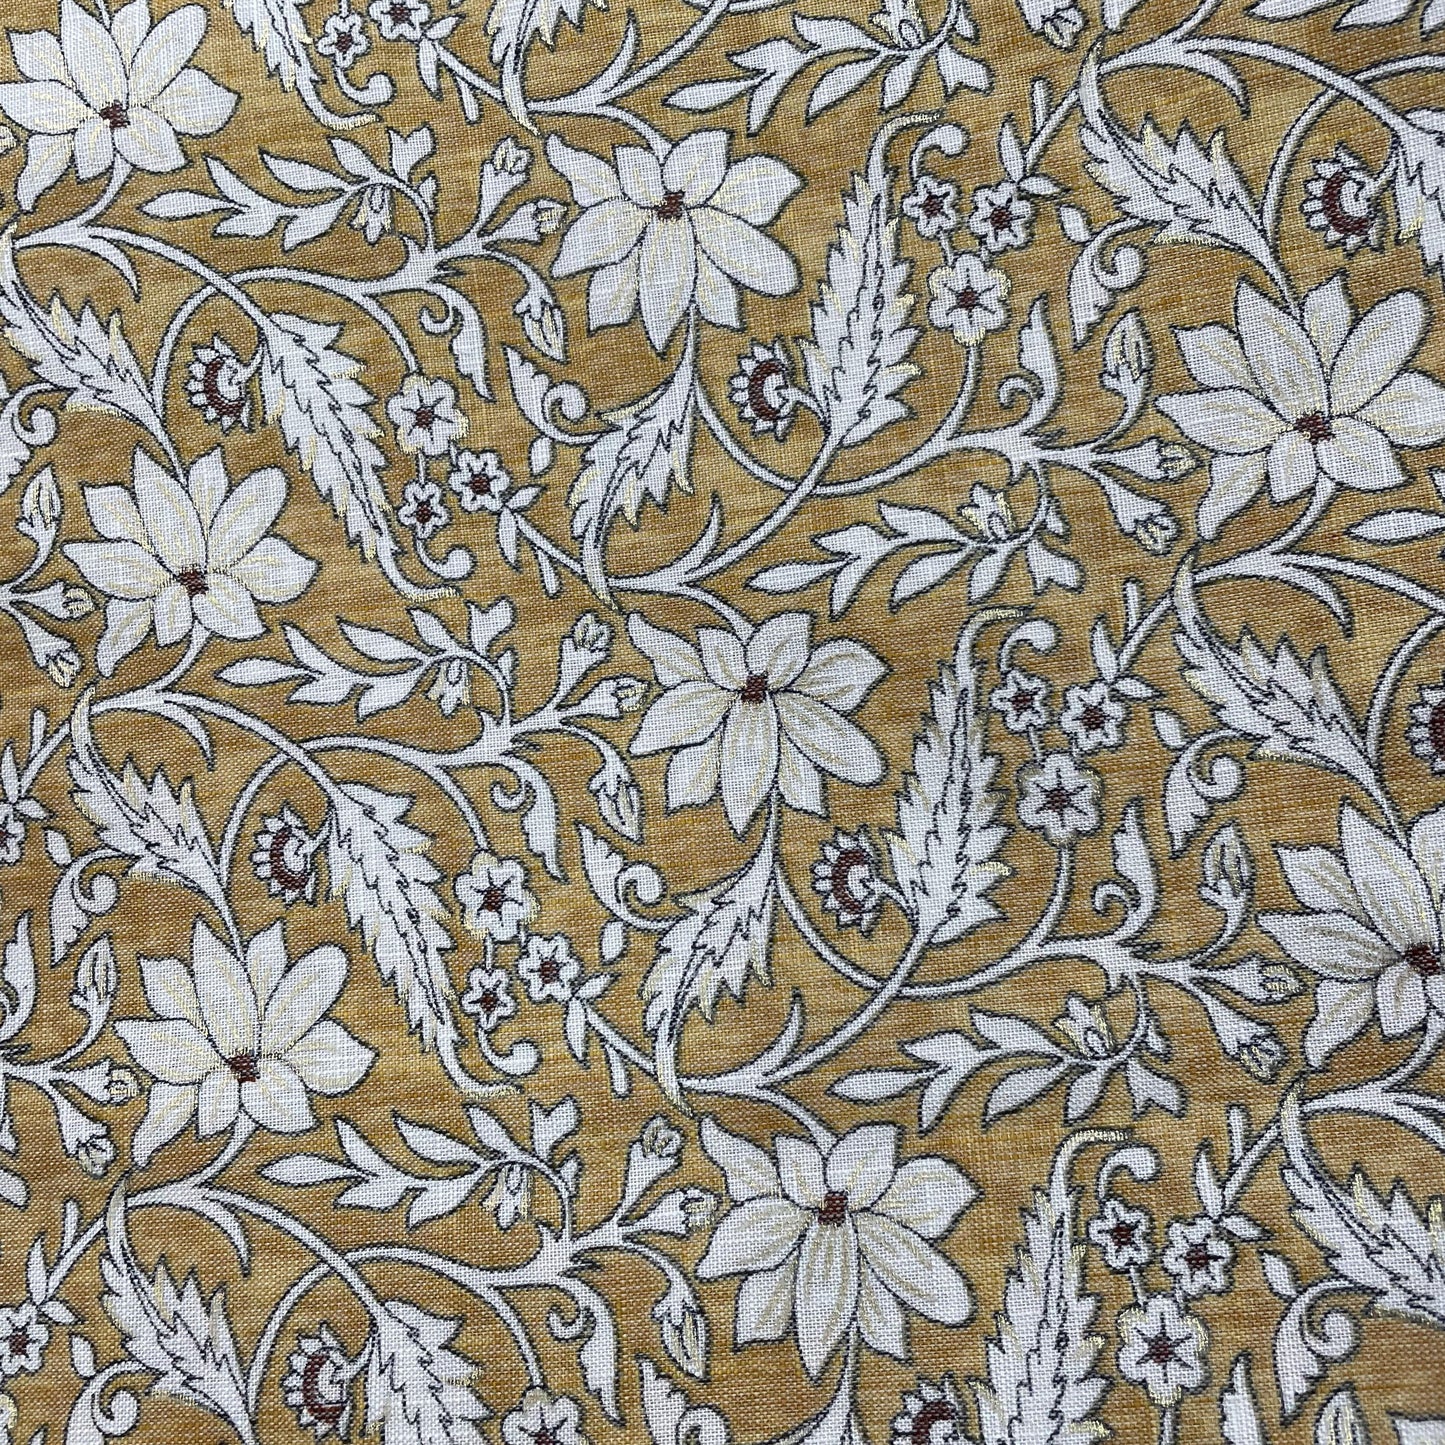 Yellow Floral With Foil Print Rayon Fabric - TradeUNO